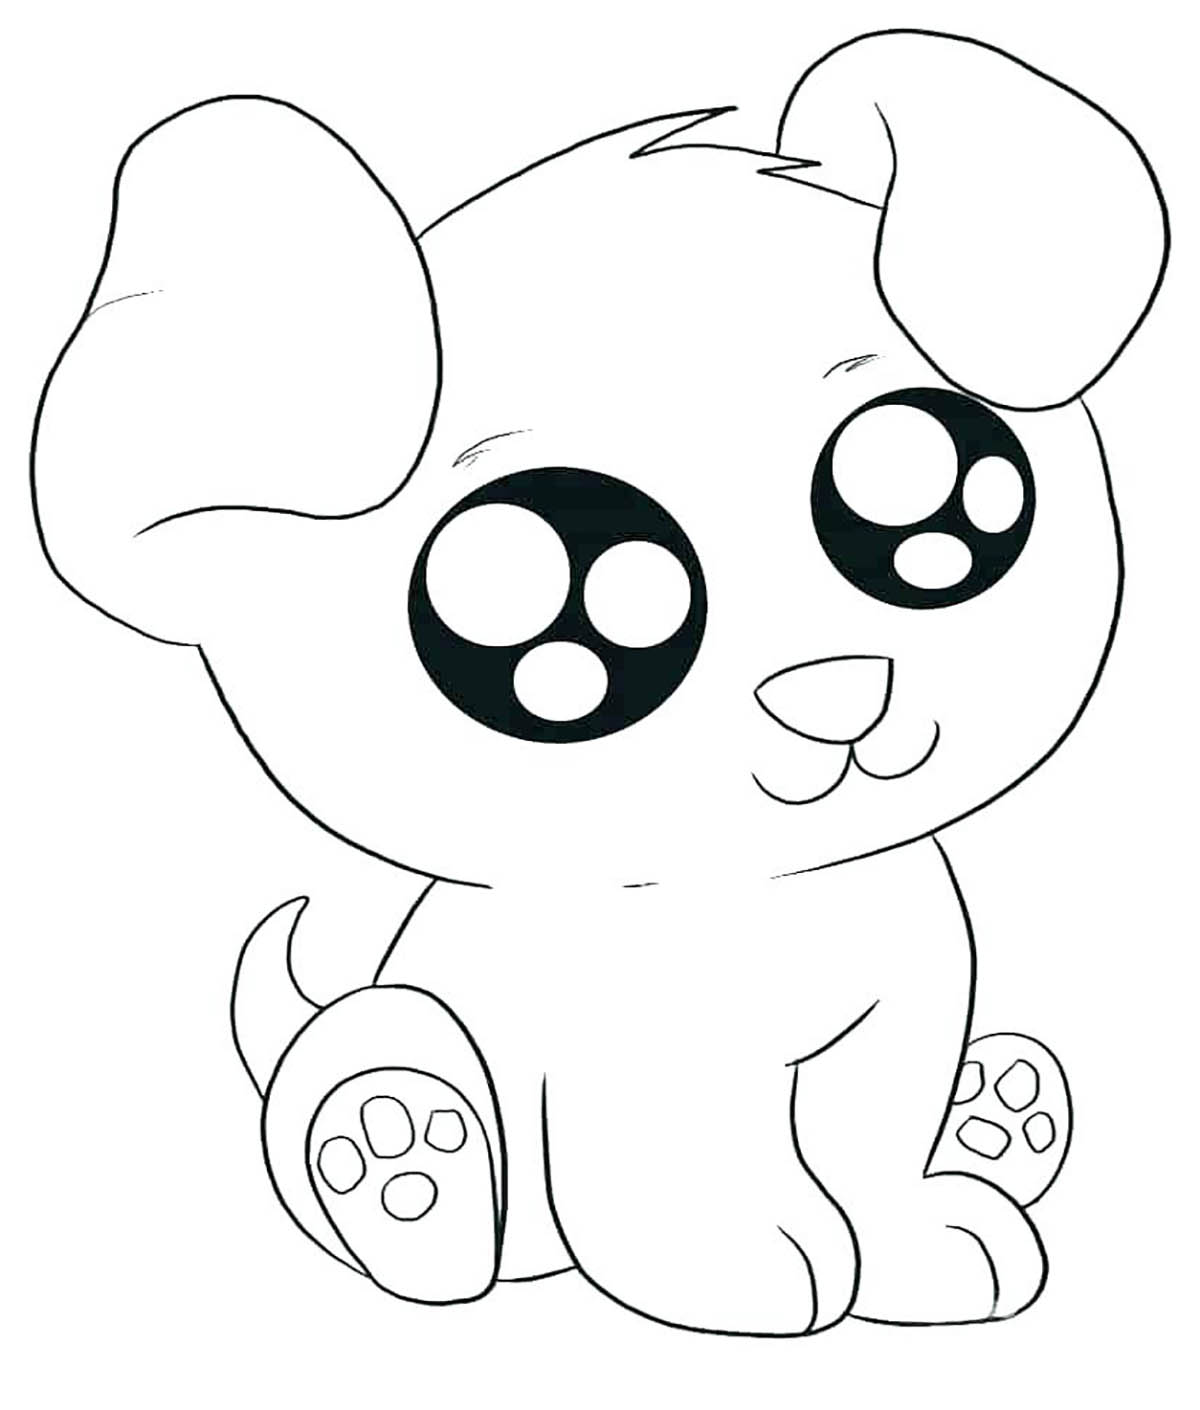 Puppy Dog Pages To Print Coloring Pages